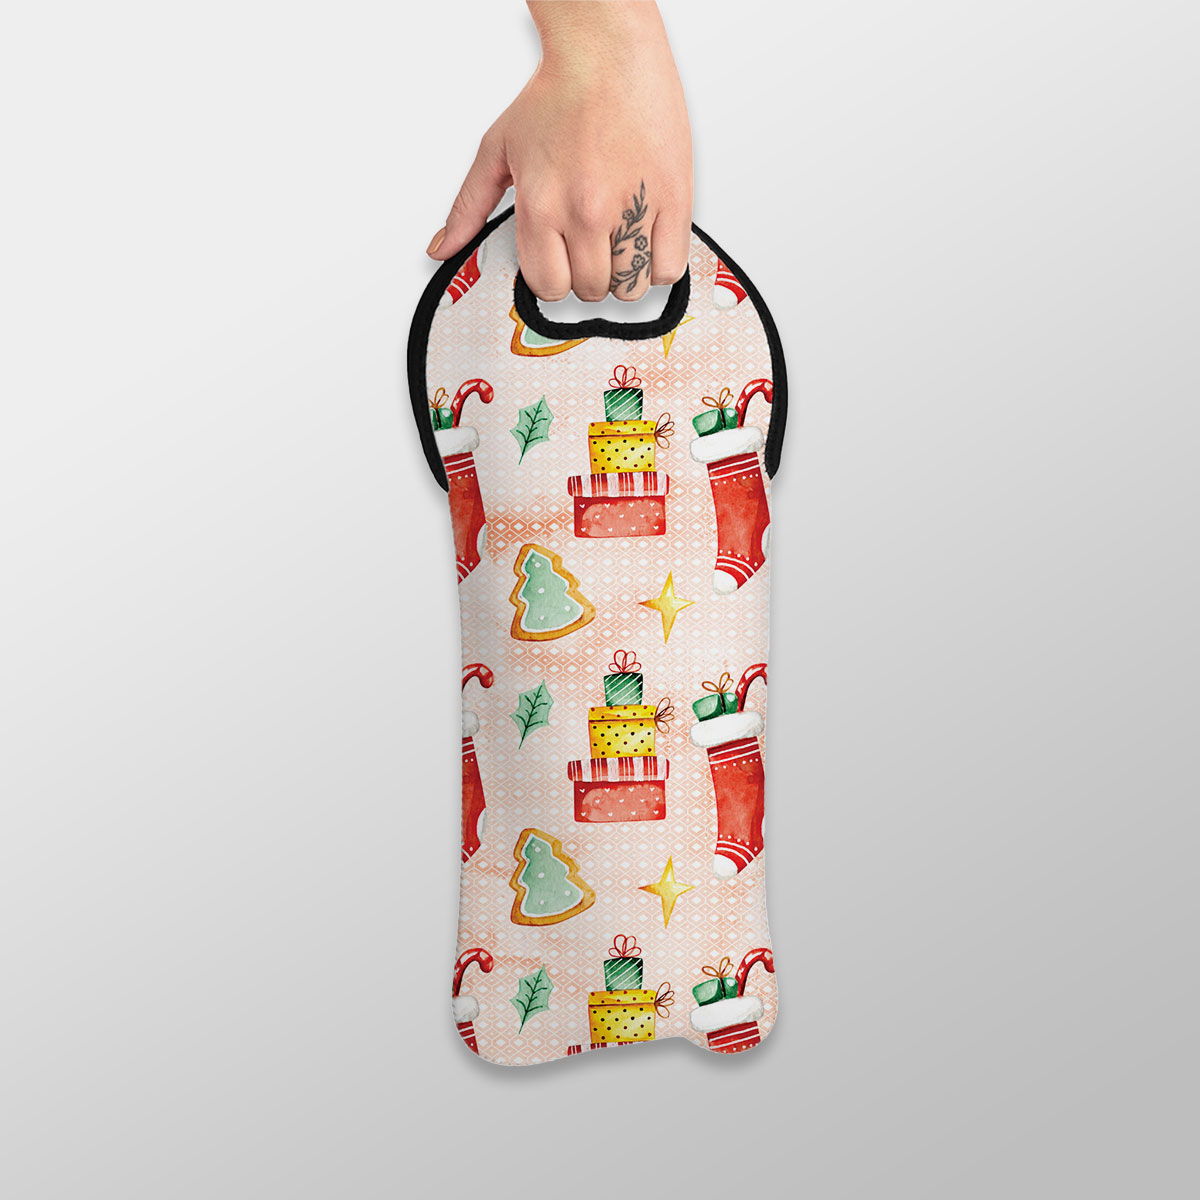 Gingerbread, Christmas Tree, Red Socks With Candy Canes Wine Tote Bag